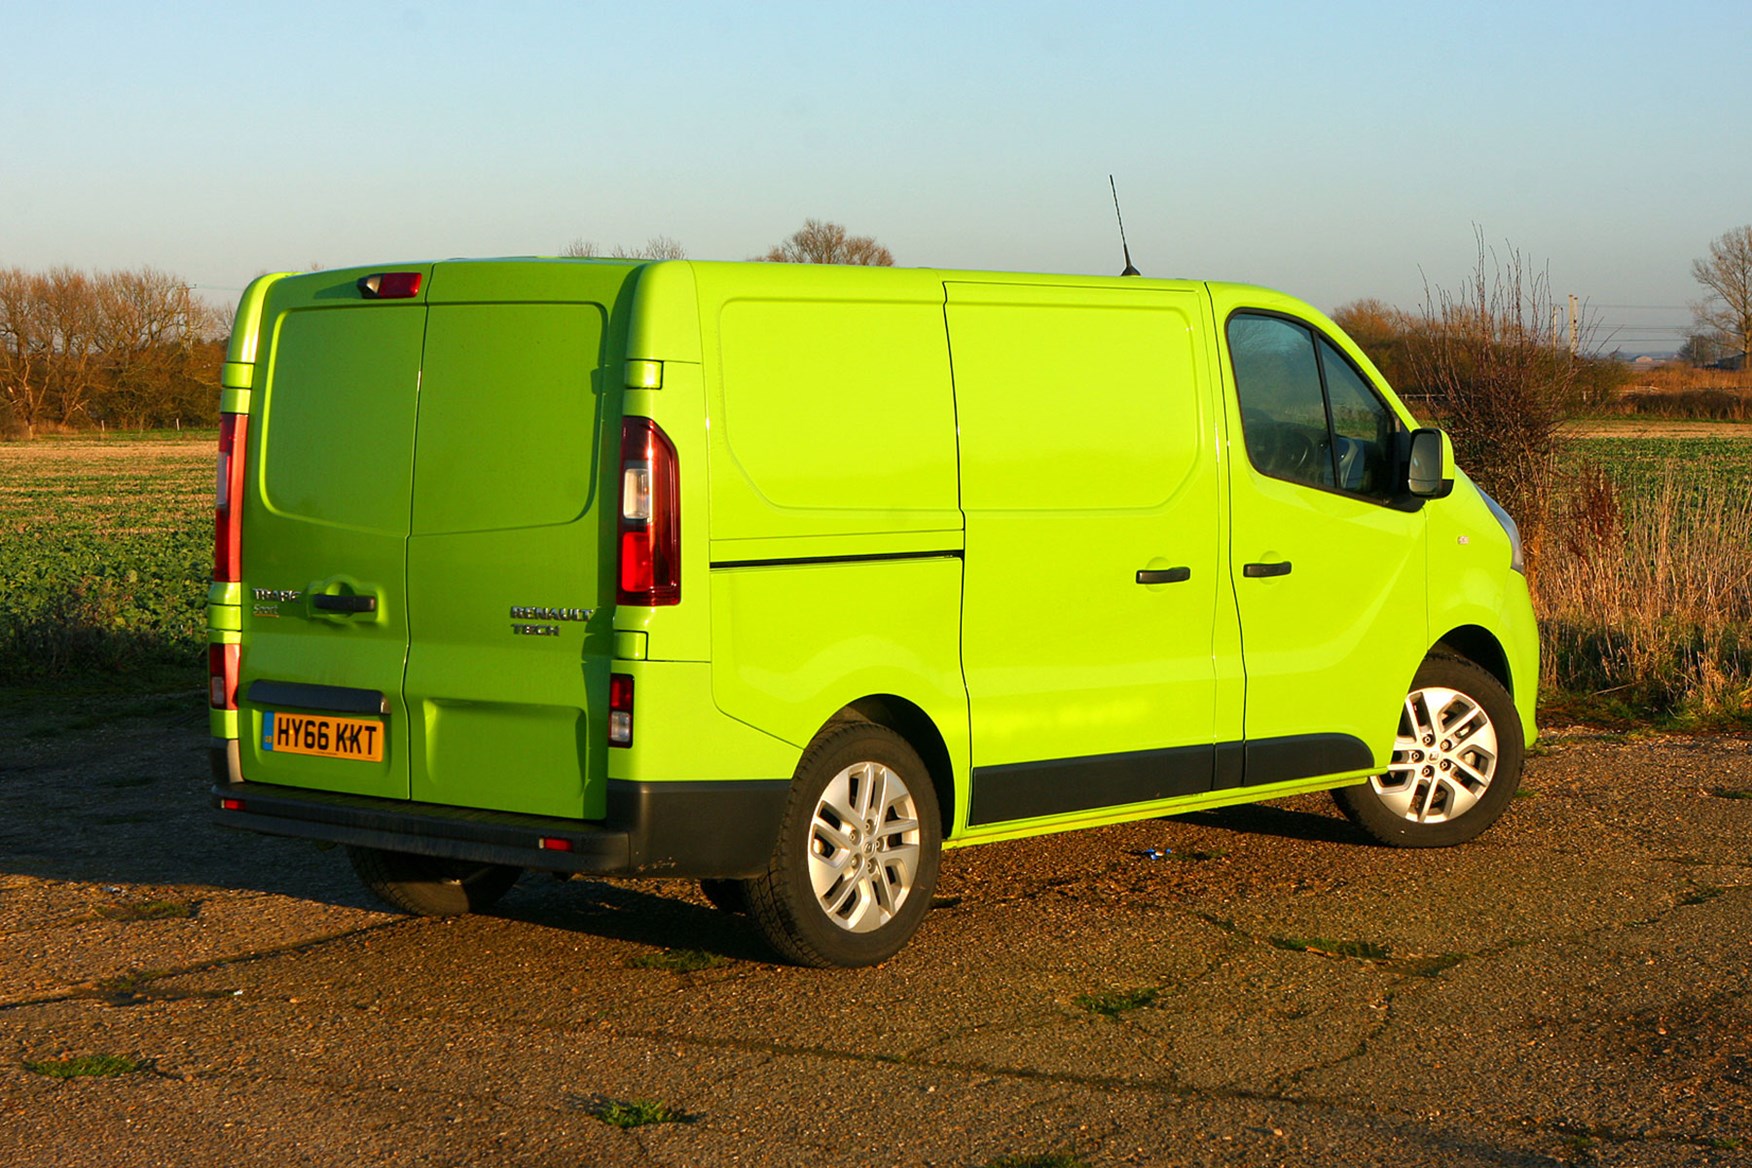 Renault Trafic Sport Euro 6 review - rear view, green